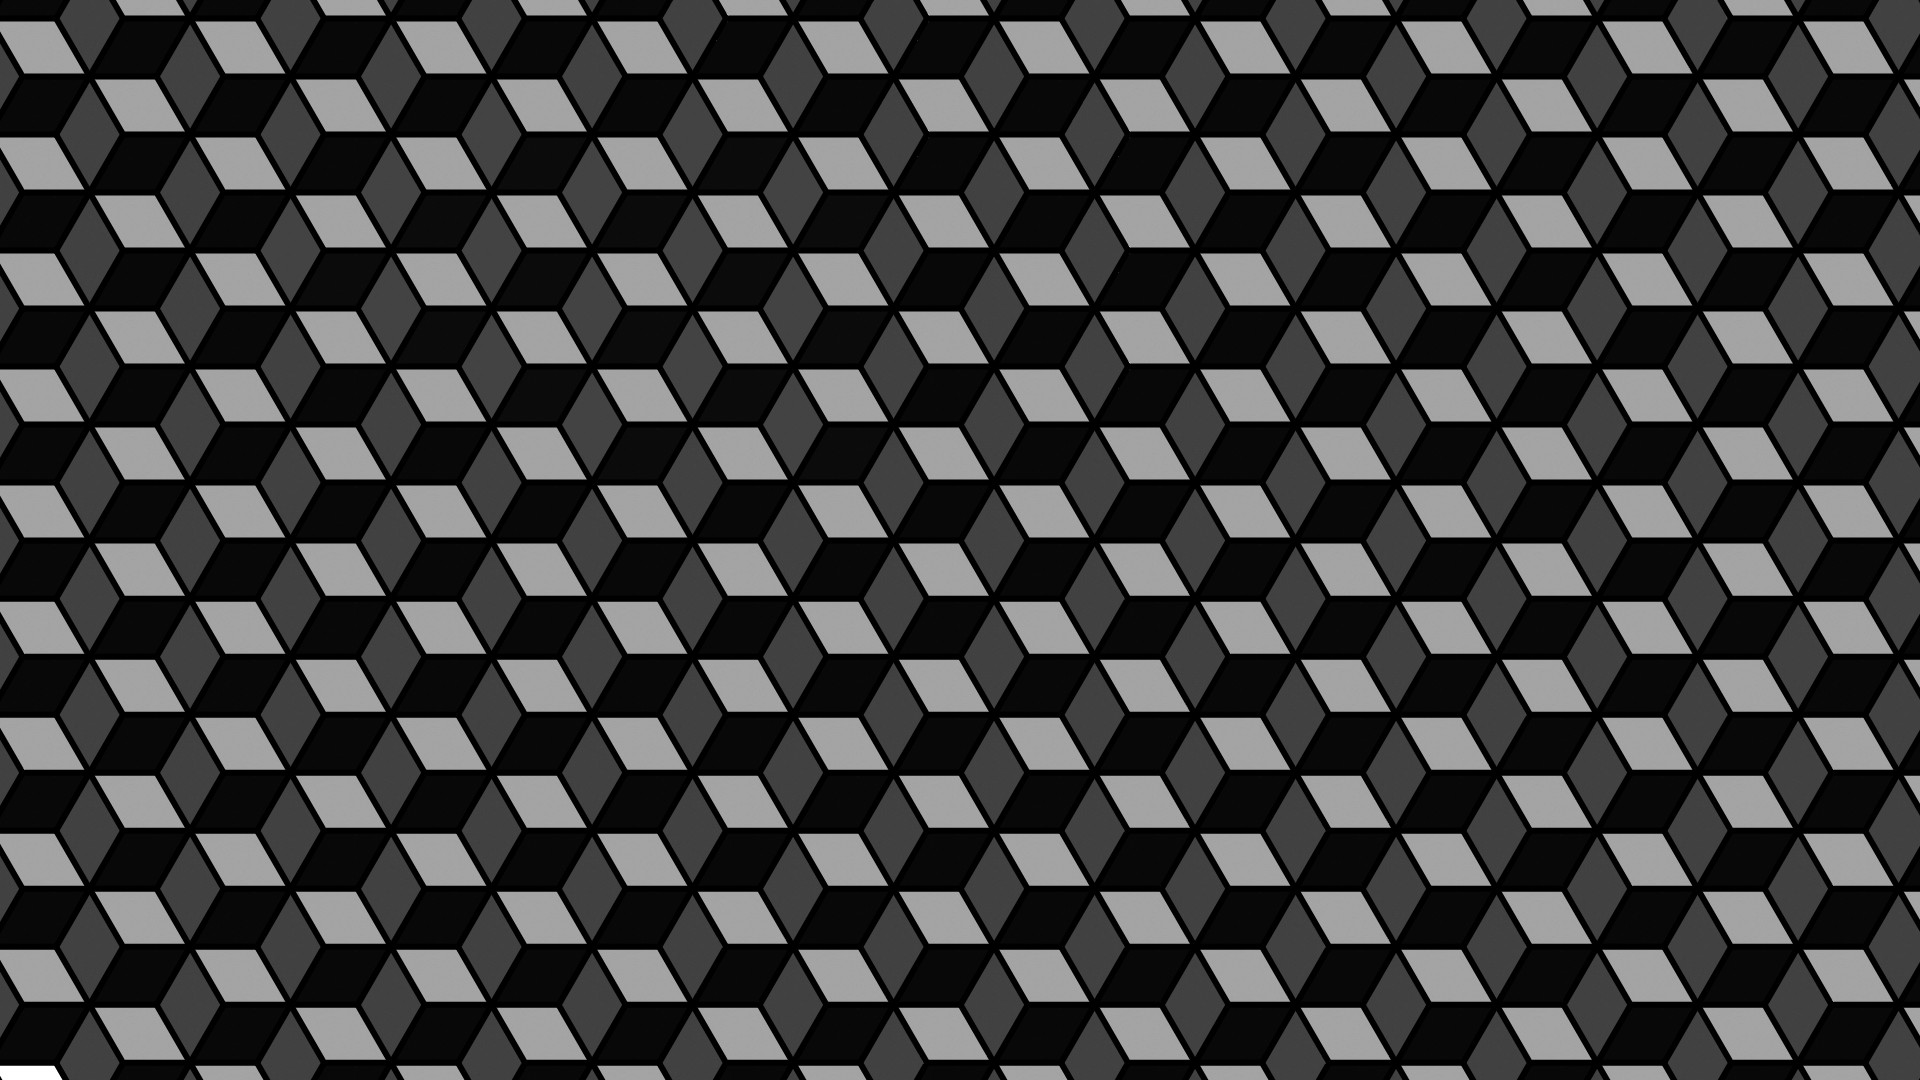 patterns for wallpaper,pattern,line,monochrome,black and white,pattern